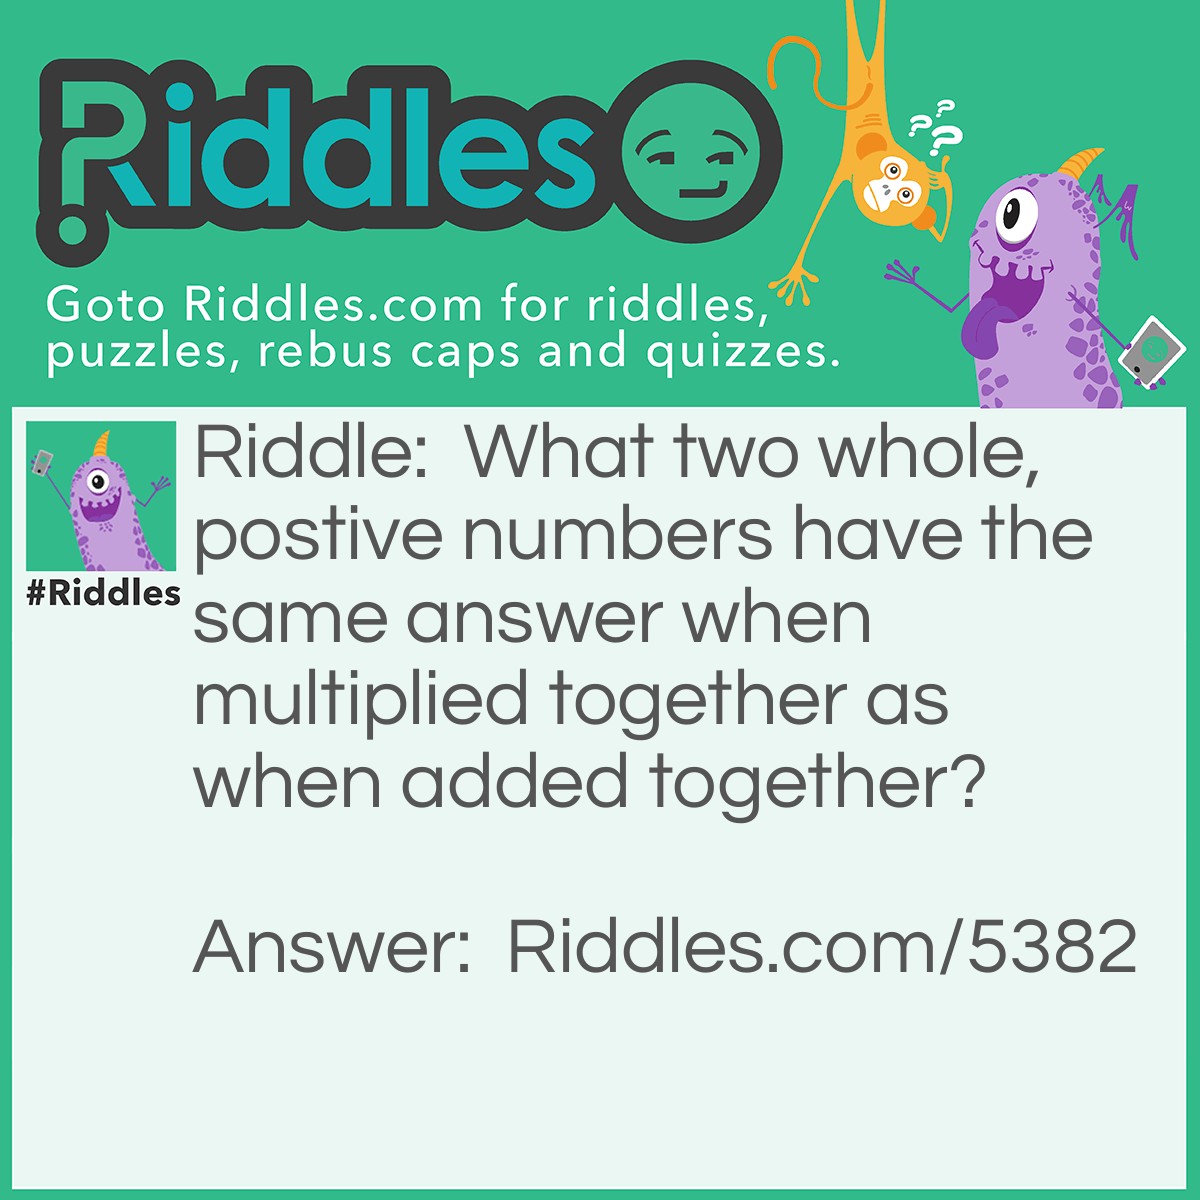 Riddle: What two whole, postive numbers have the same answer when multiplied together as when added together? Answer: 2 and 2.